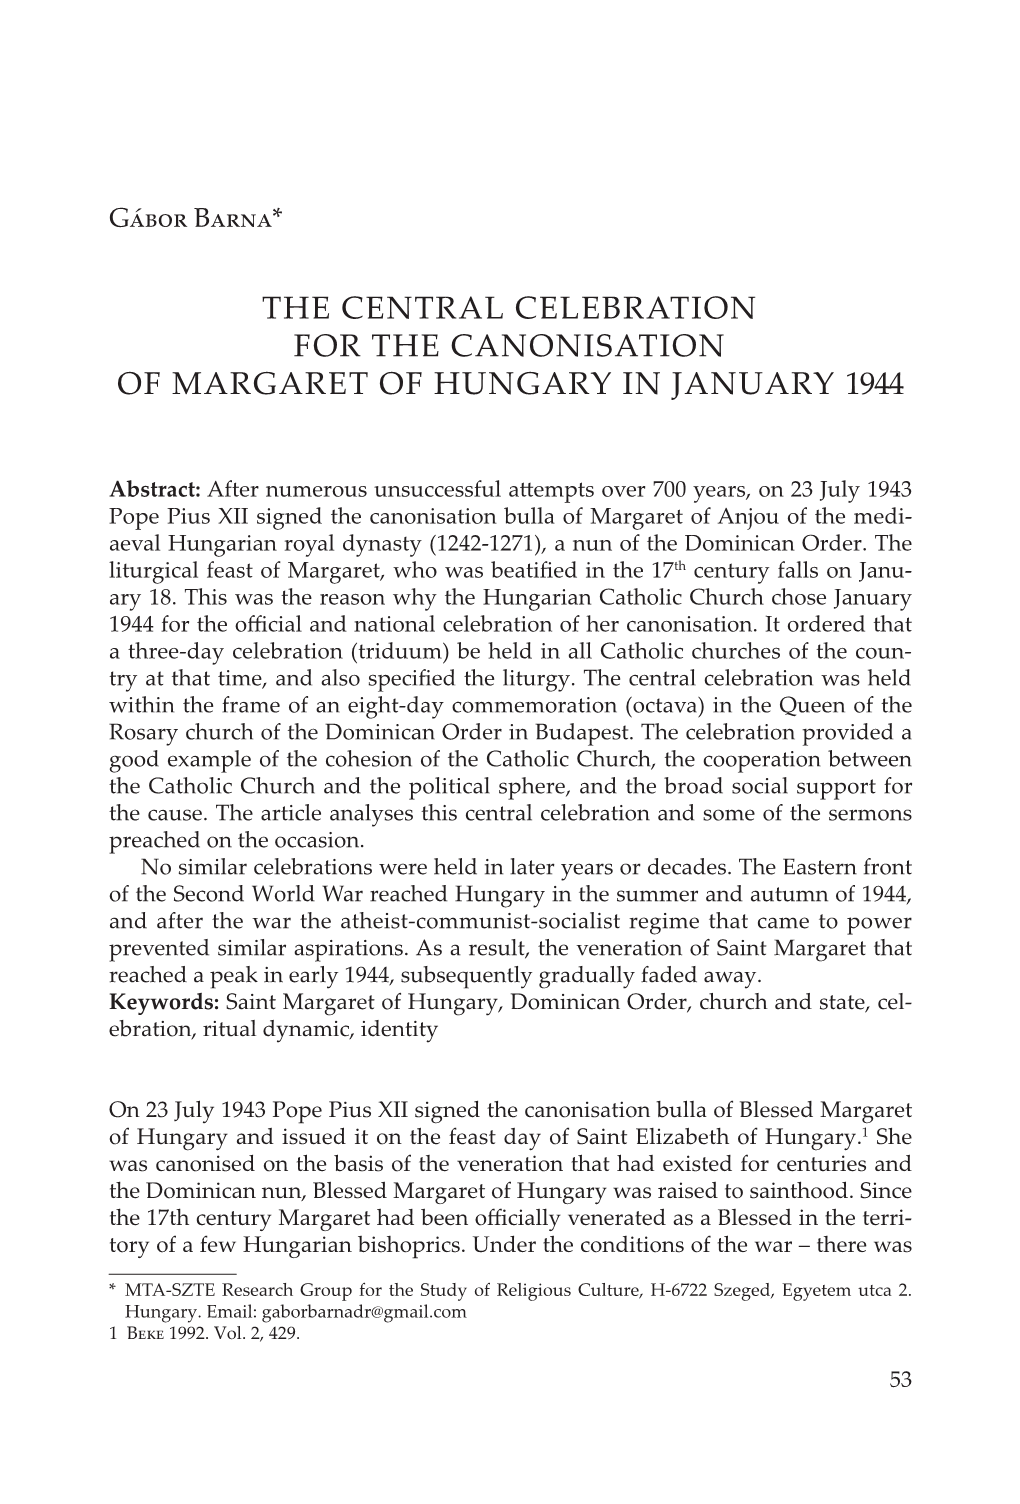 The Central Celebration for the Canonisation of Margaret of Hungary in January 1944